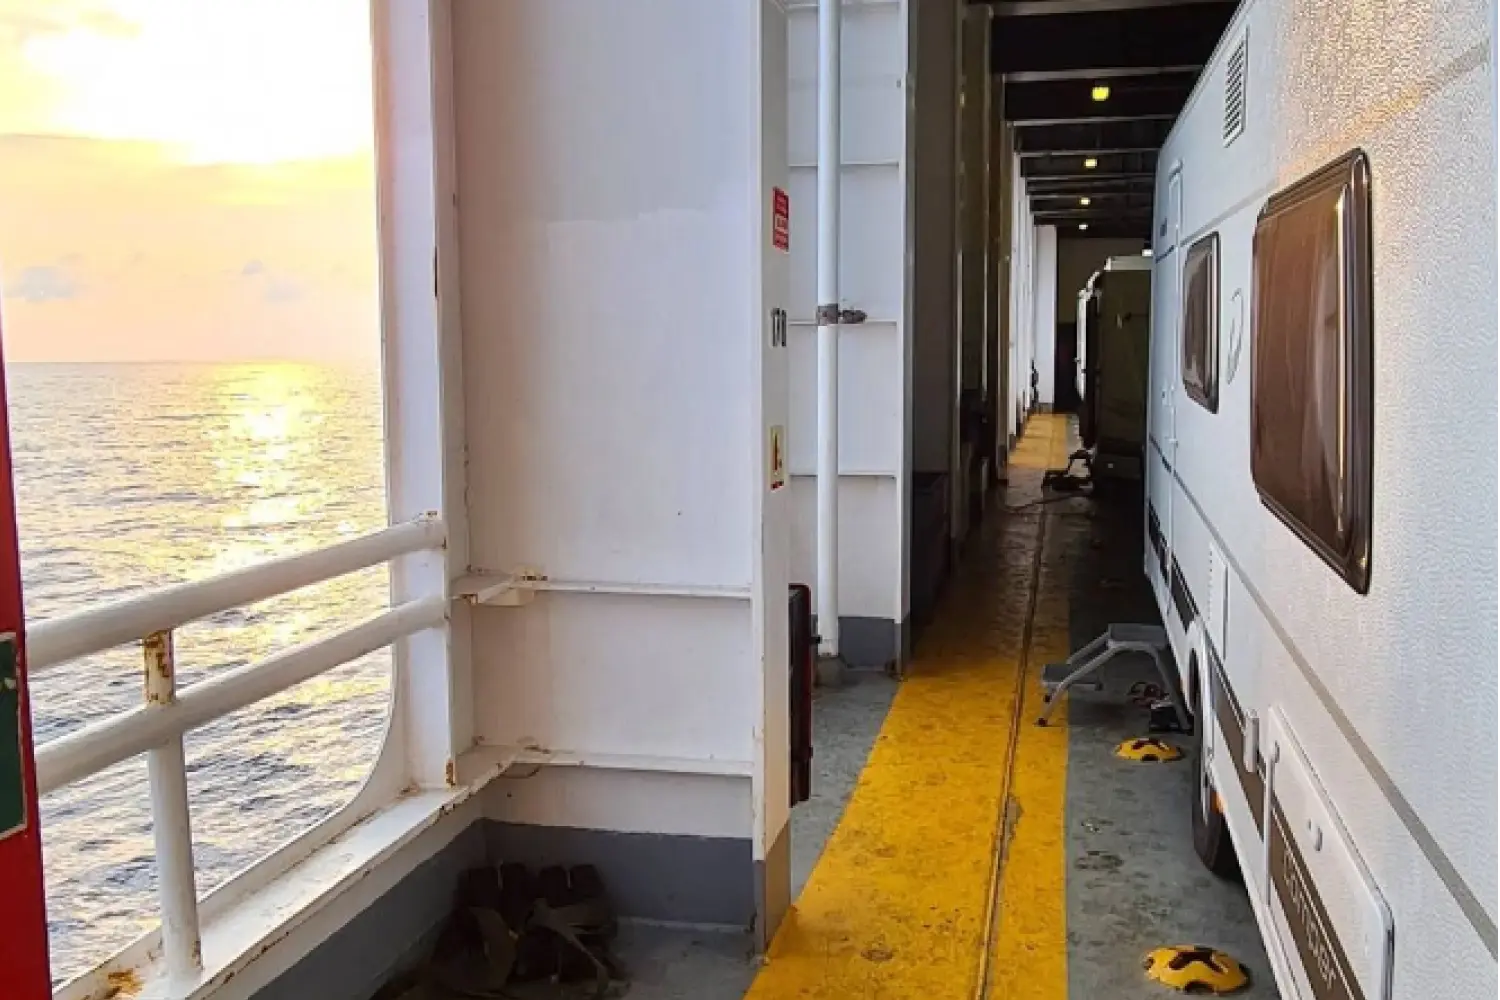 Camping on board from Italy to Greece - Spacious garage to park caravans, minivans etc